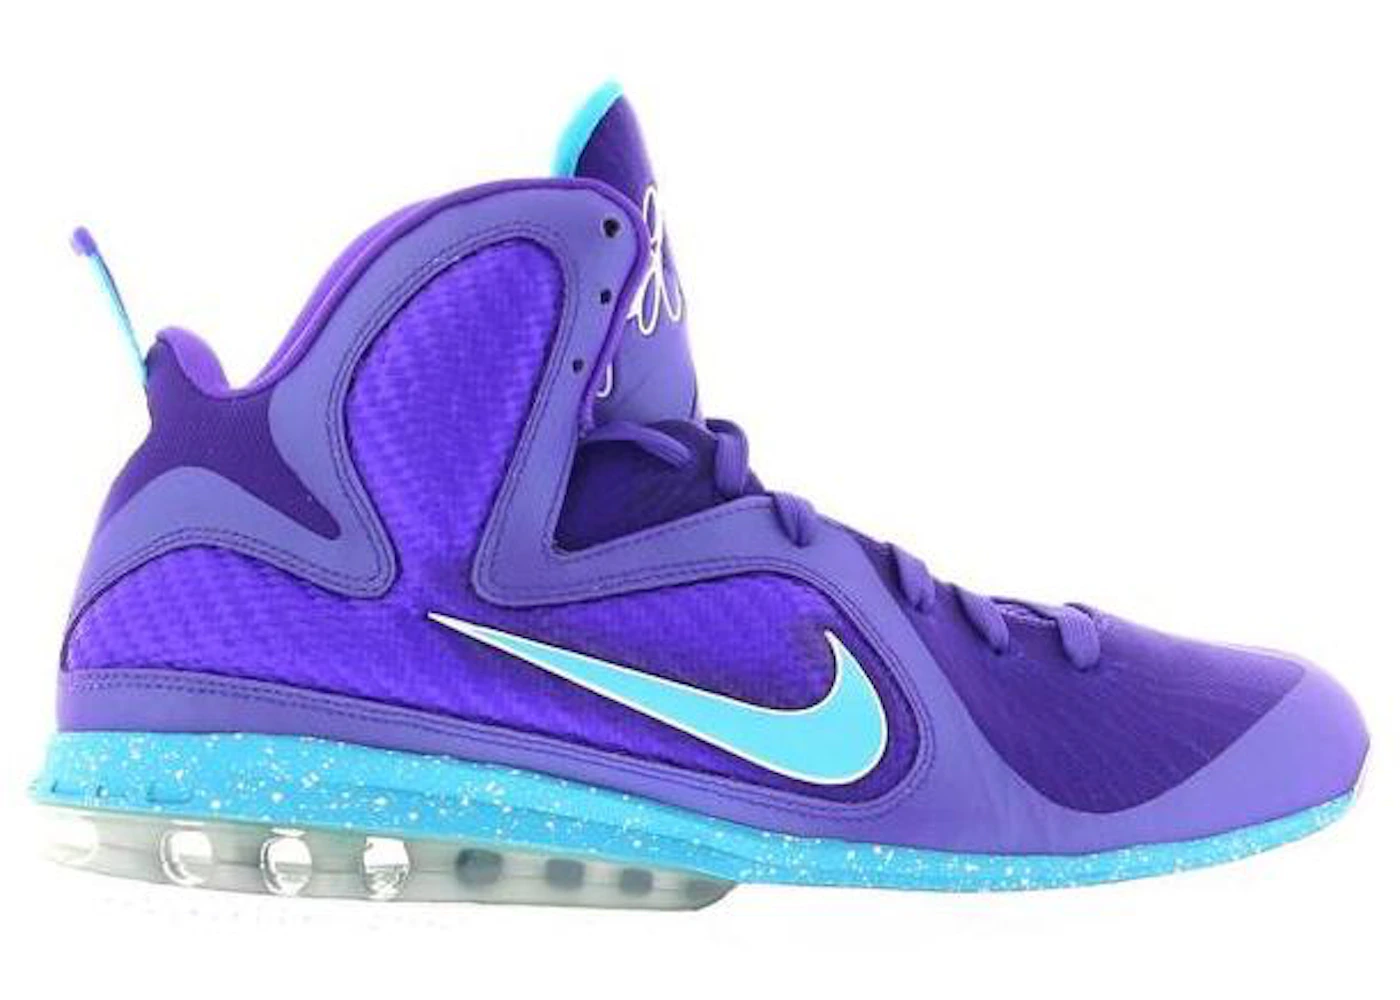 LeBron James and his Summit Lake Hornets Basketball Team Exclusive